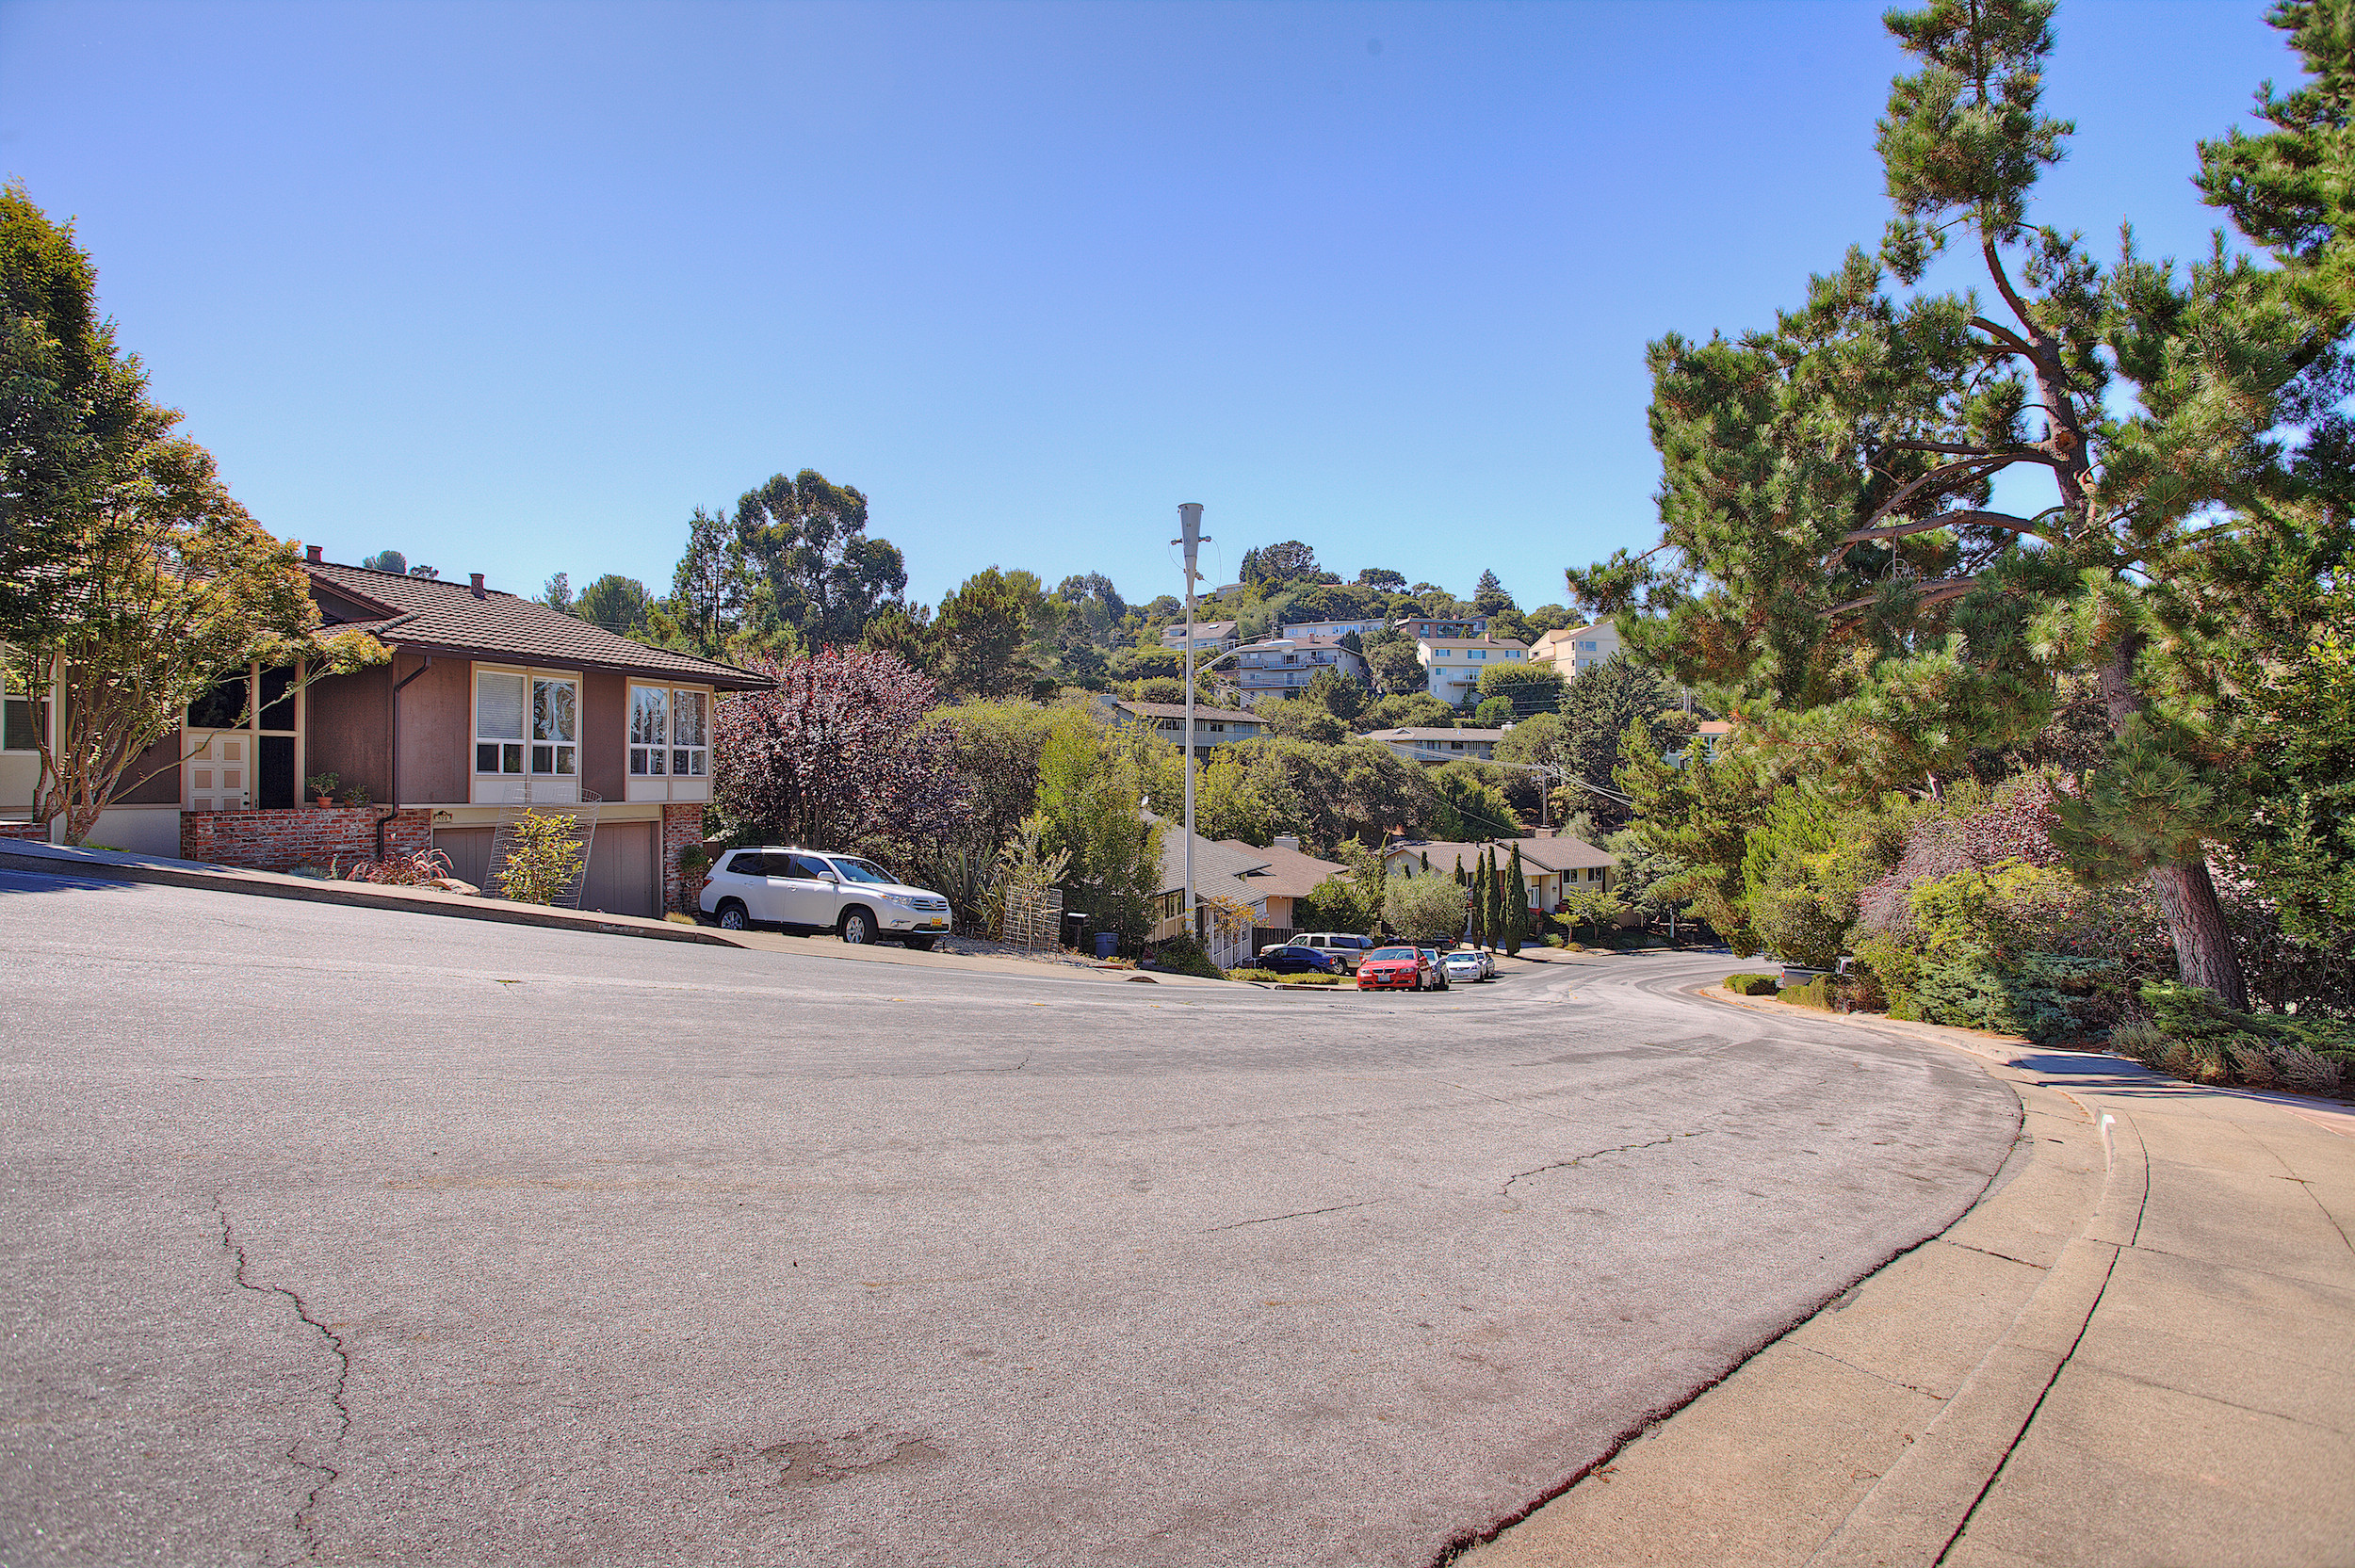 Downhill street view of Antique Forest Homes area in Belmont